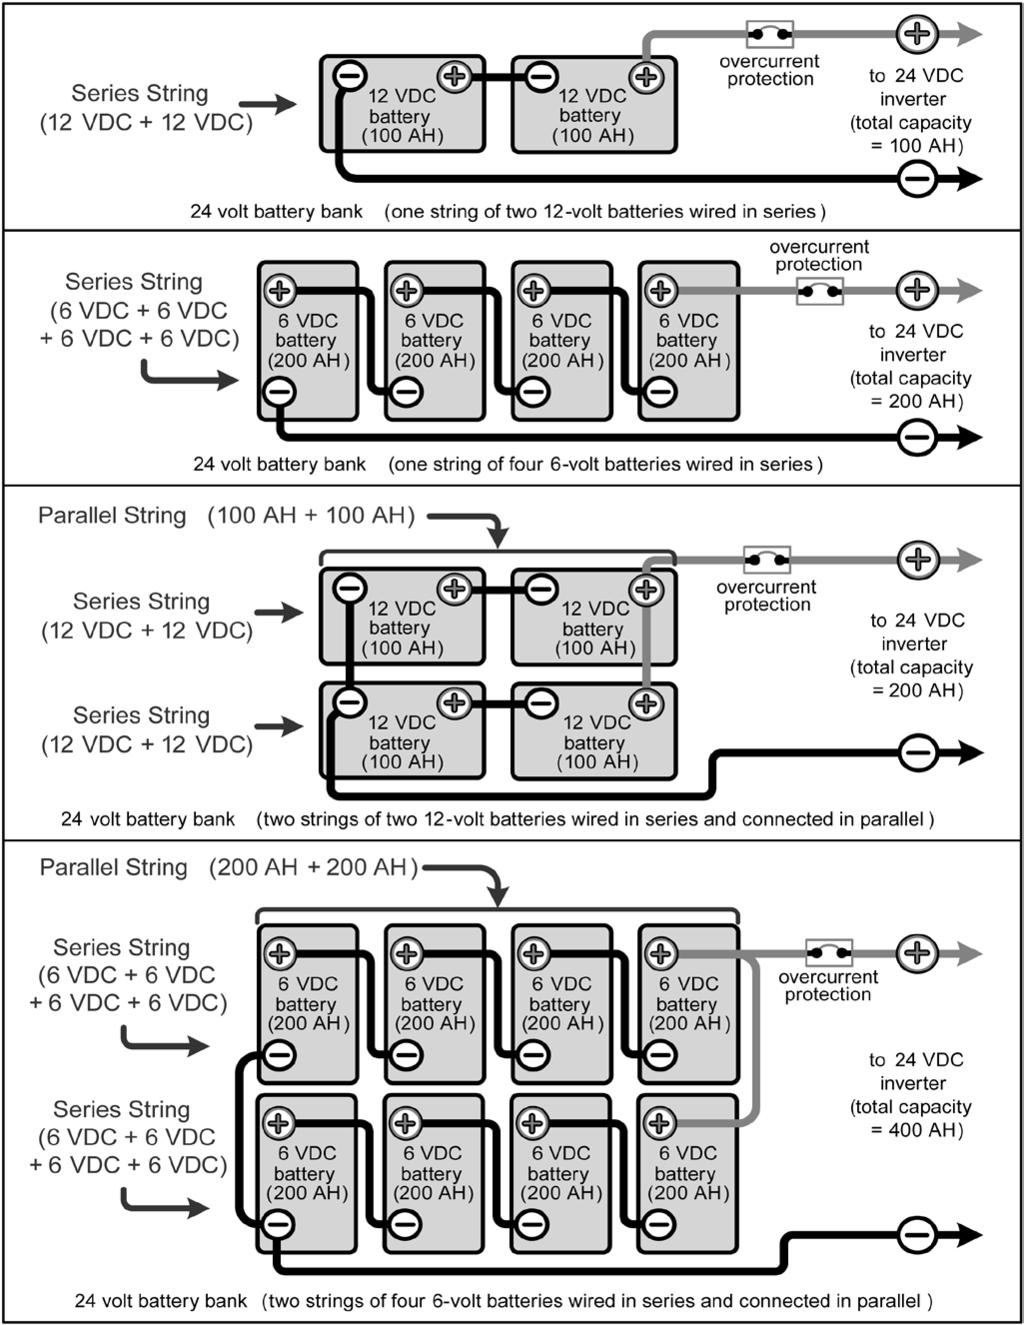 Appendix B - Battery Information to 24 VDC inverter (total capacity = 100 AH) 24 volt battery bank (one string of two 12-volt batteries wired in series) to 24 VDC inverter (total capacity = 200 AH)